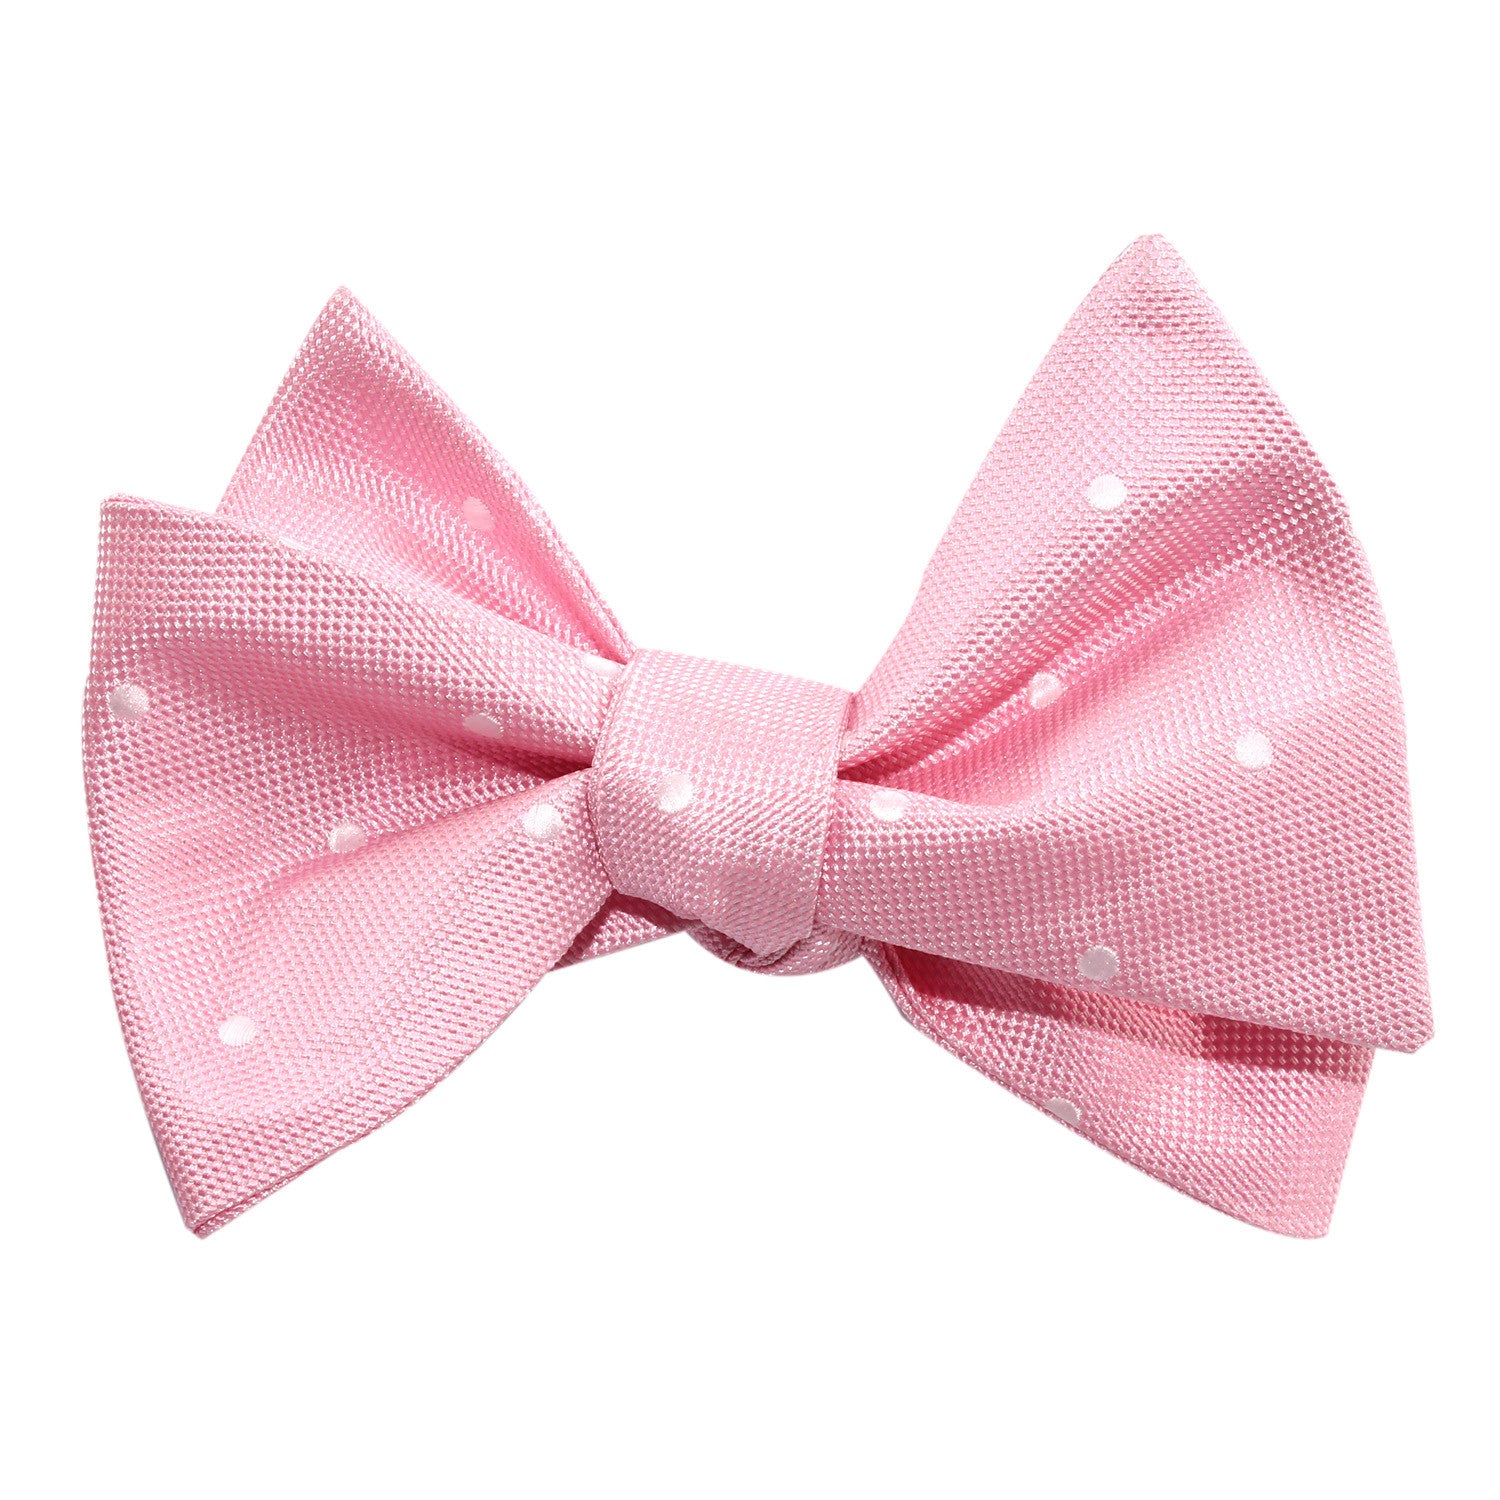 Baby Pink with White Polka Dots Self Tie Bow Tie 2